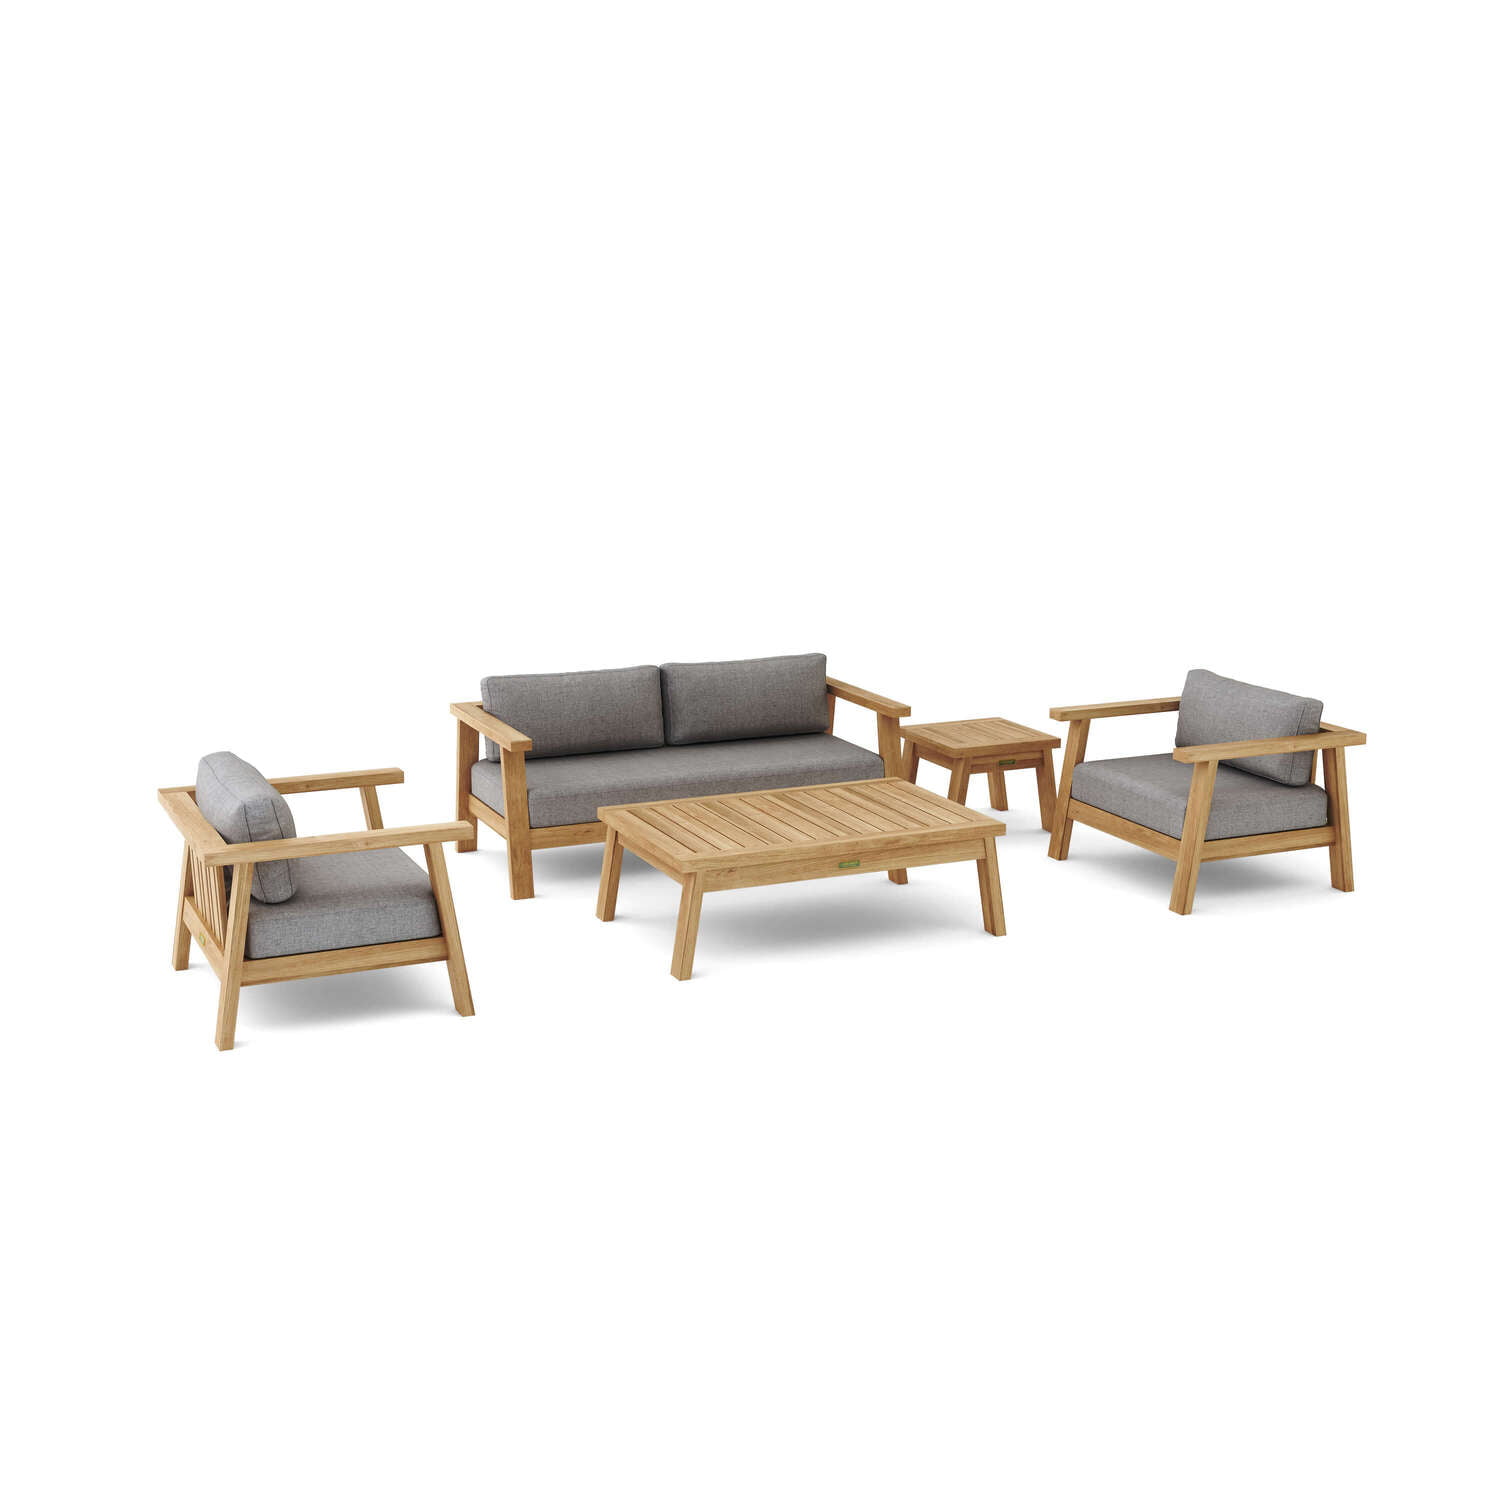 Picture of Anderson Teak SET-322 Palermo Deep Seating Set, Natural Smooth Well Sanded - 5 Piece